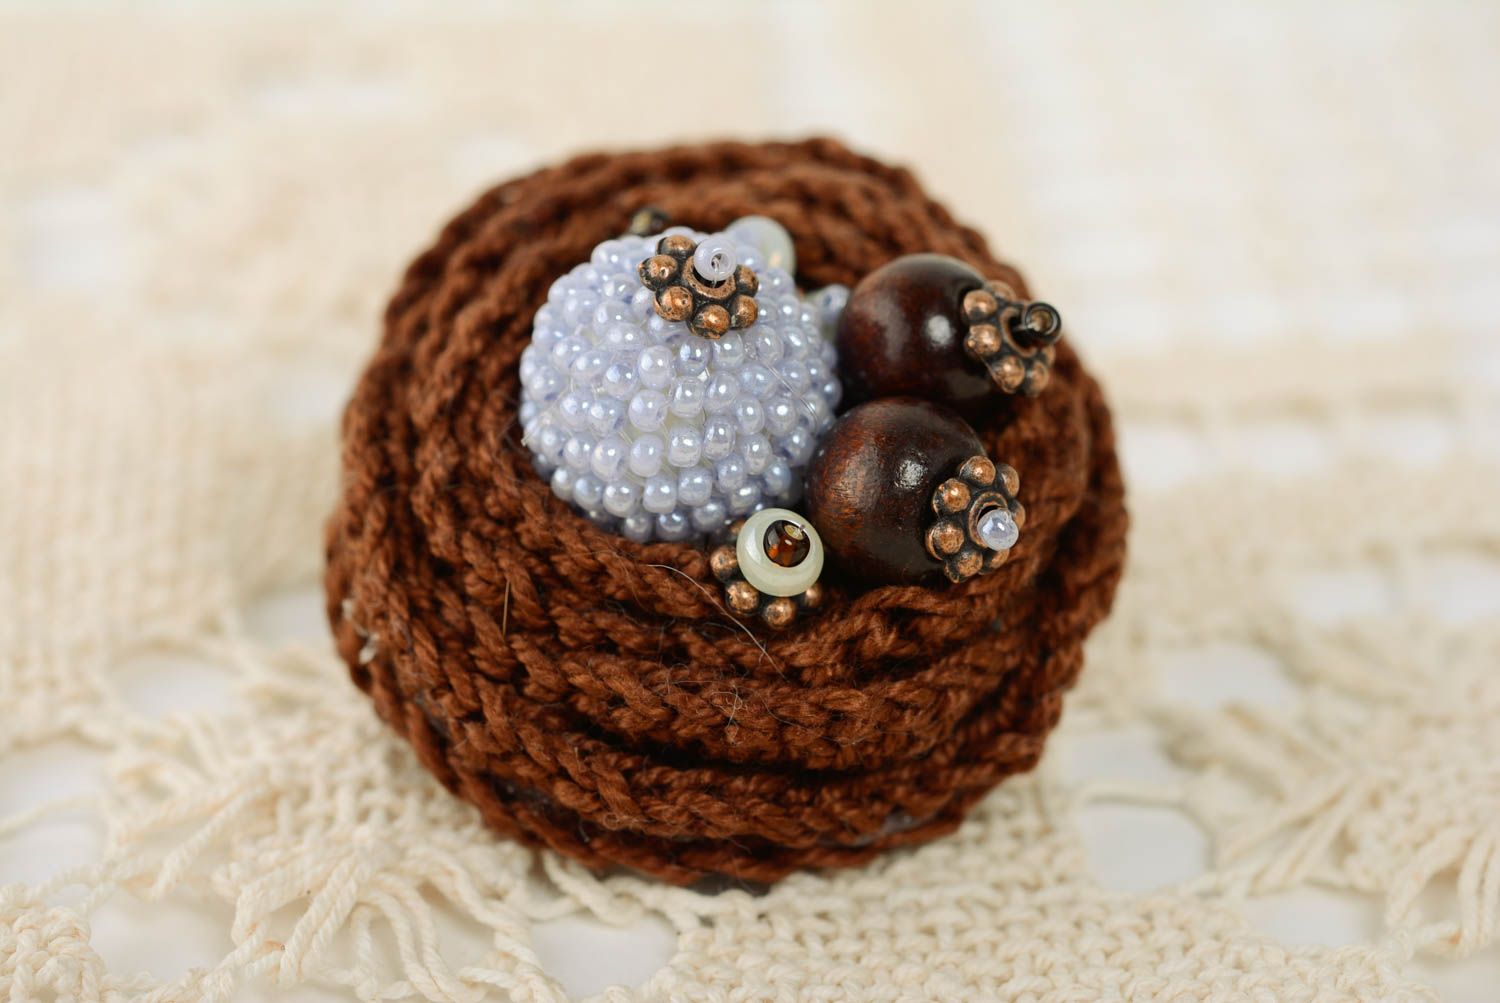 Crocheted flower brooch with brown beads and wood beads stylish accessory photo 1